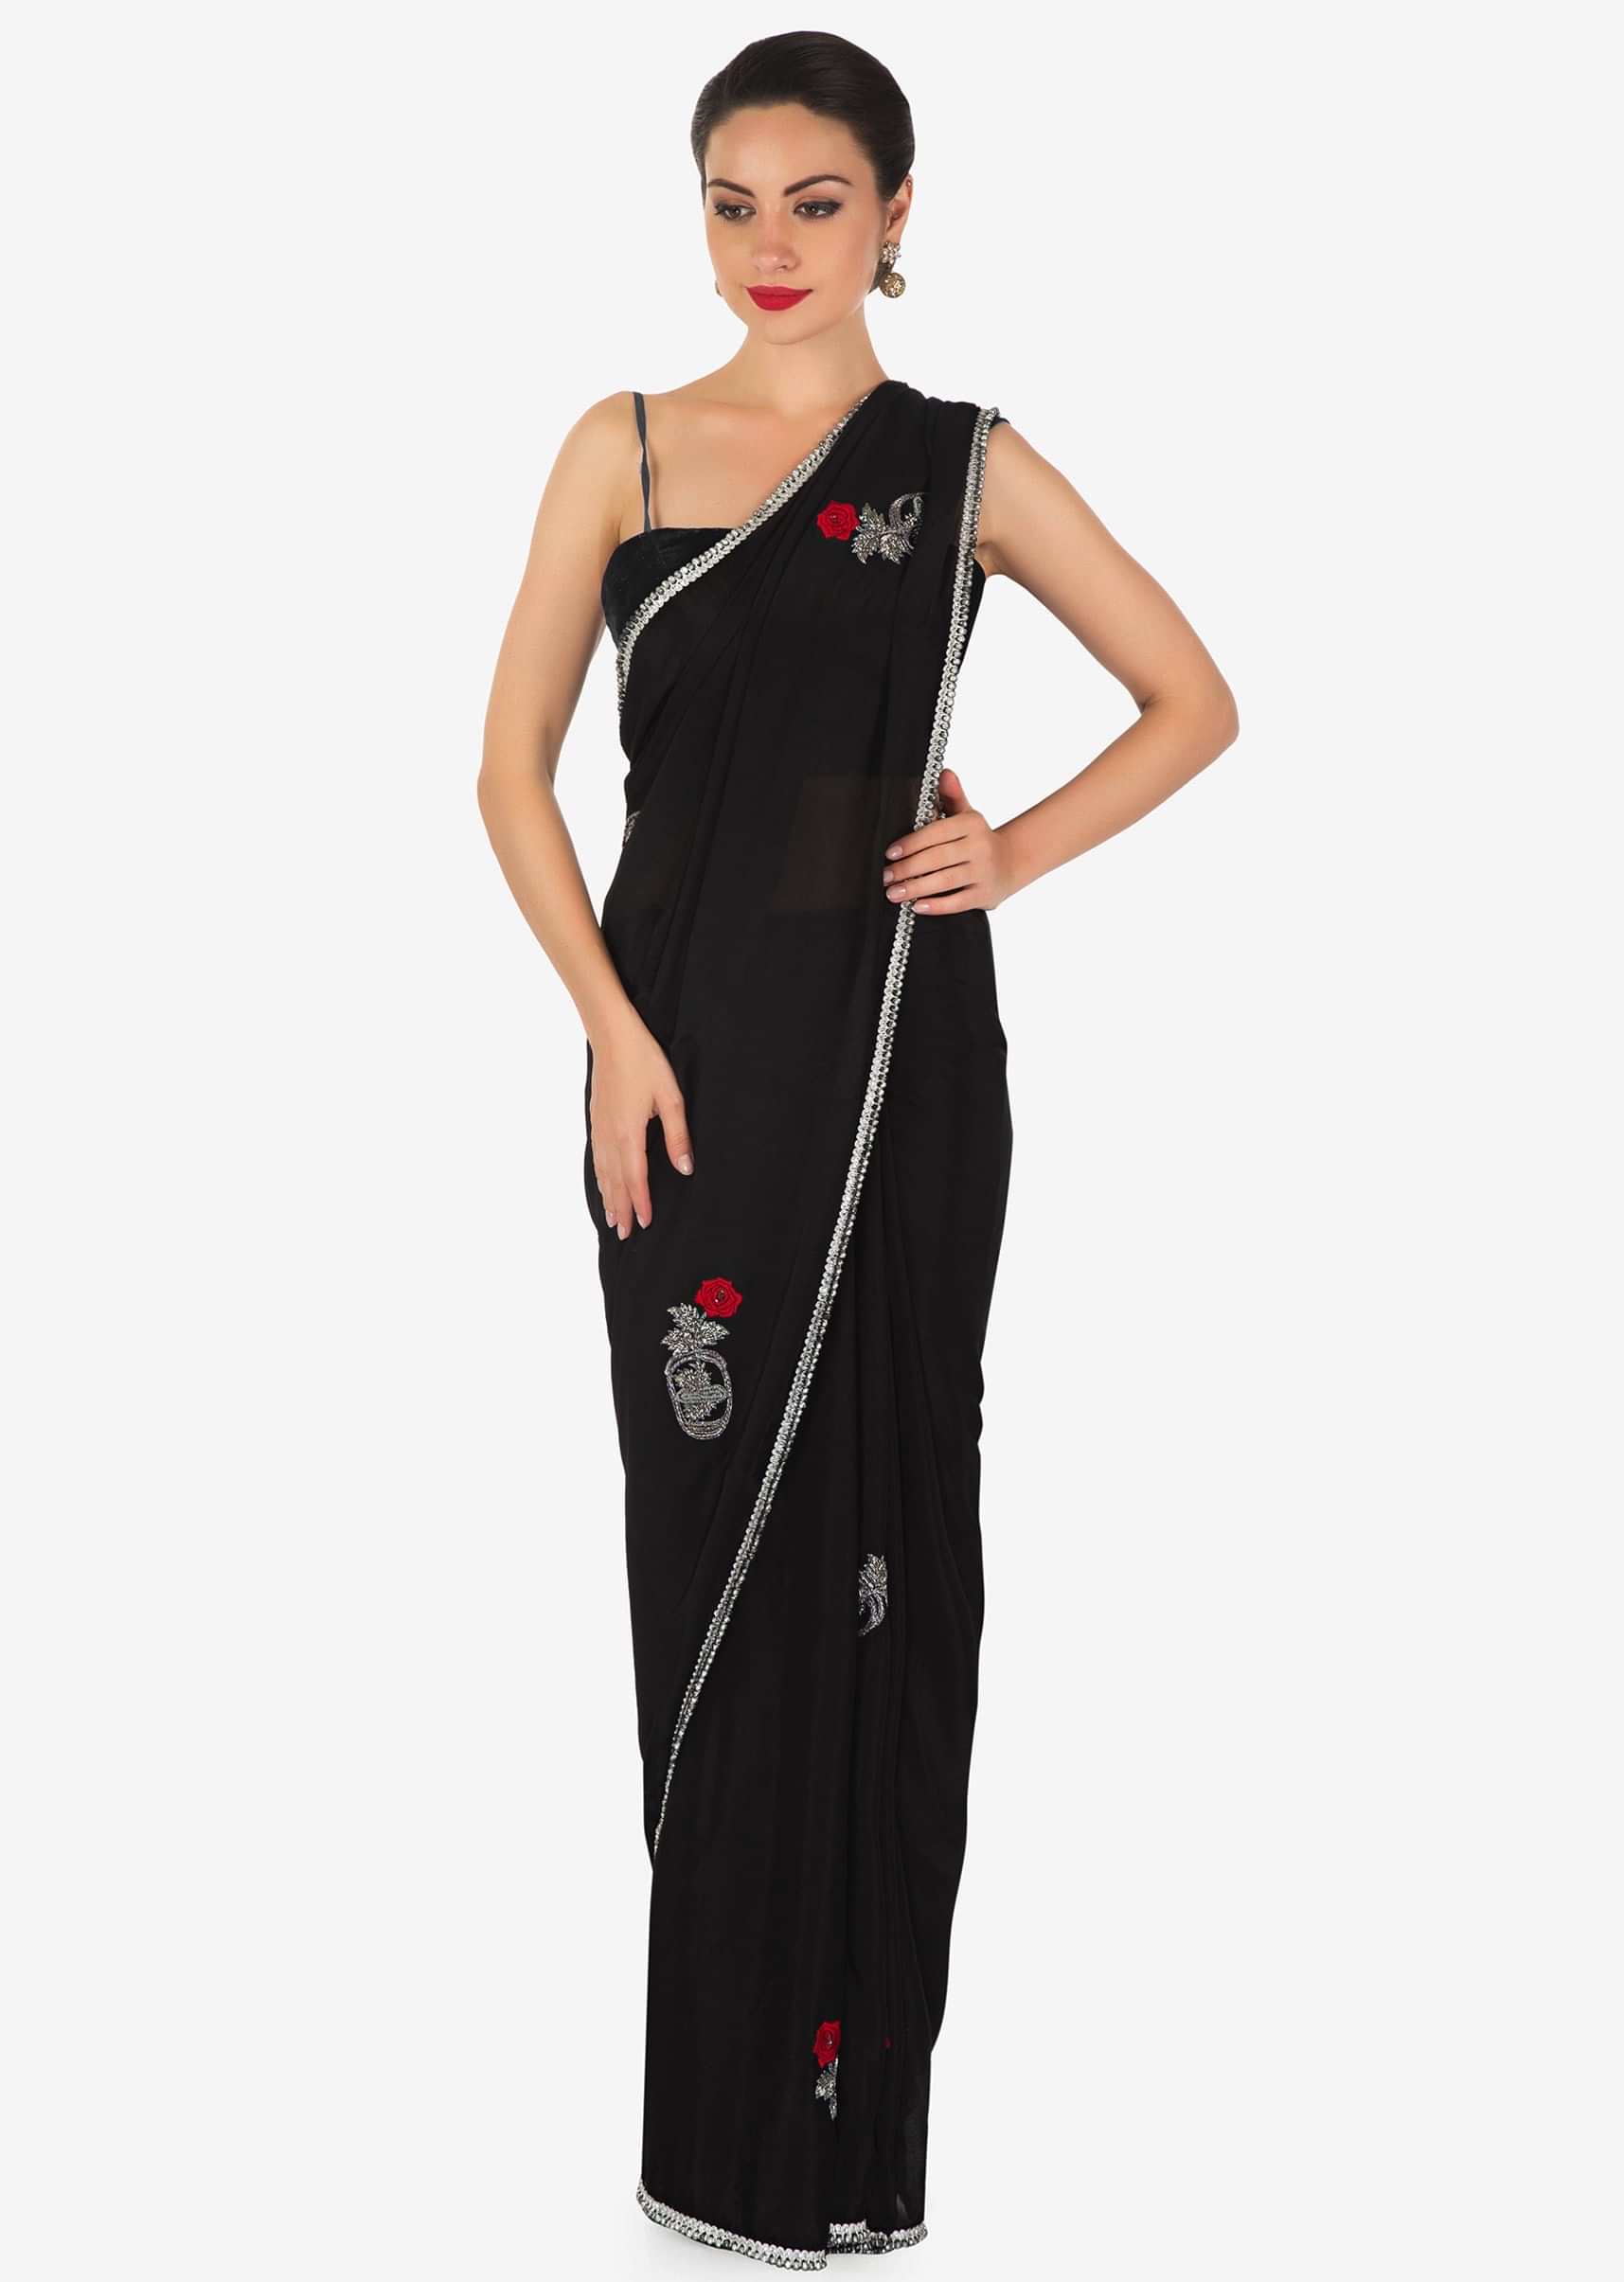 Black saree in chiffon satin with resham and cut dana embroidered butti in rose motif